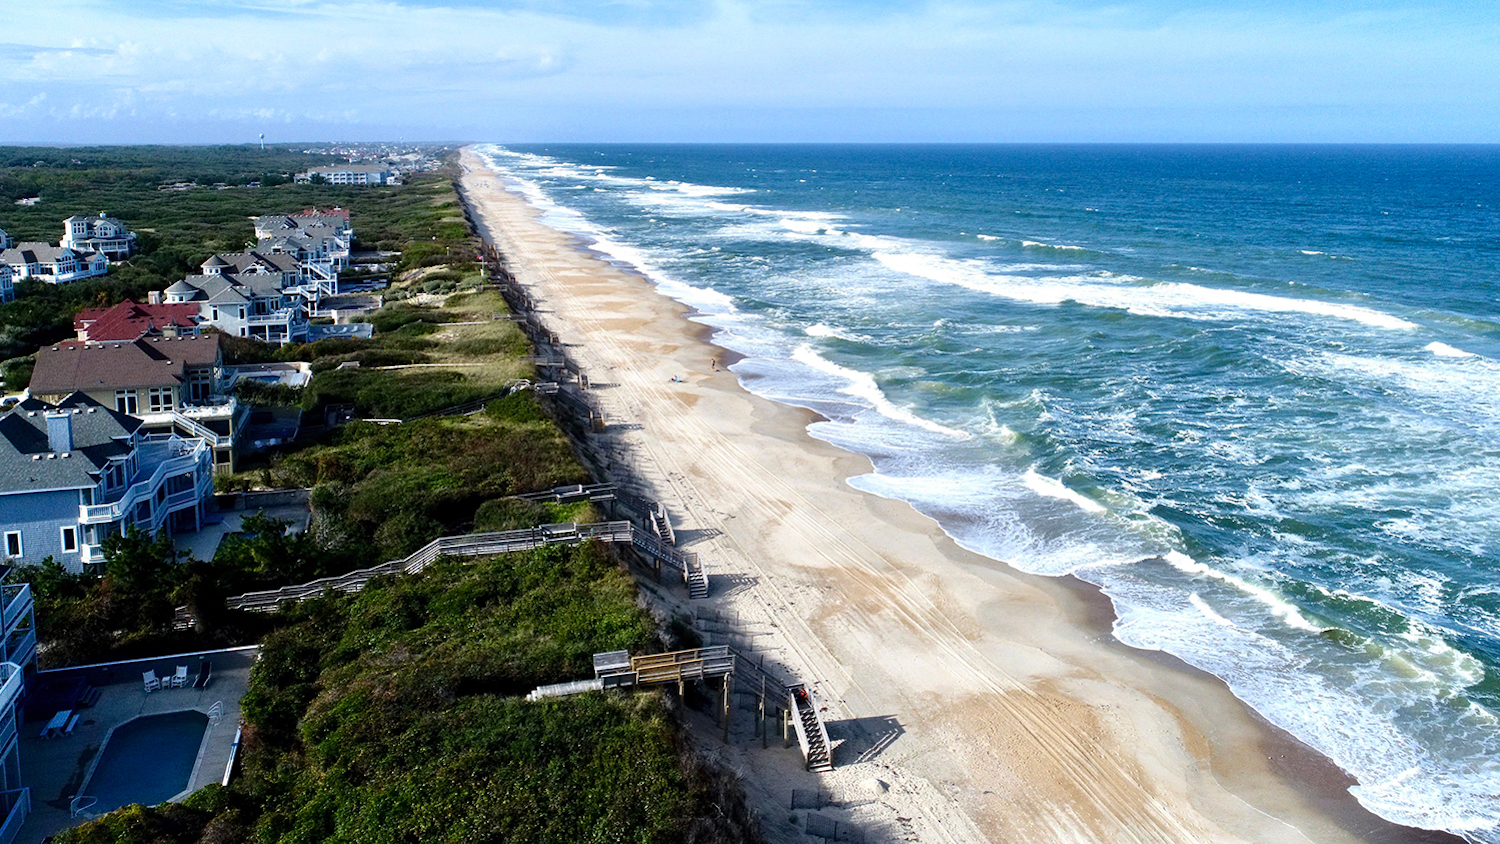 The coast of North Carolina's Corolla Beach in the Outer Banks